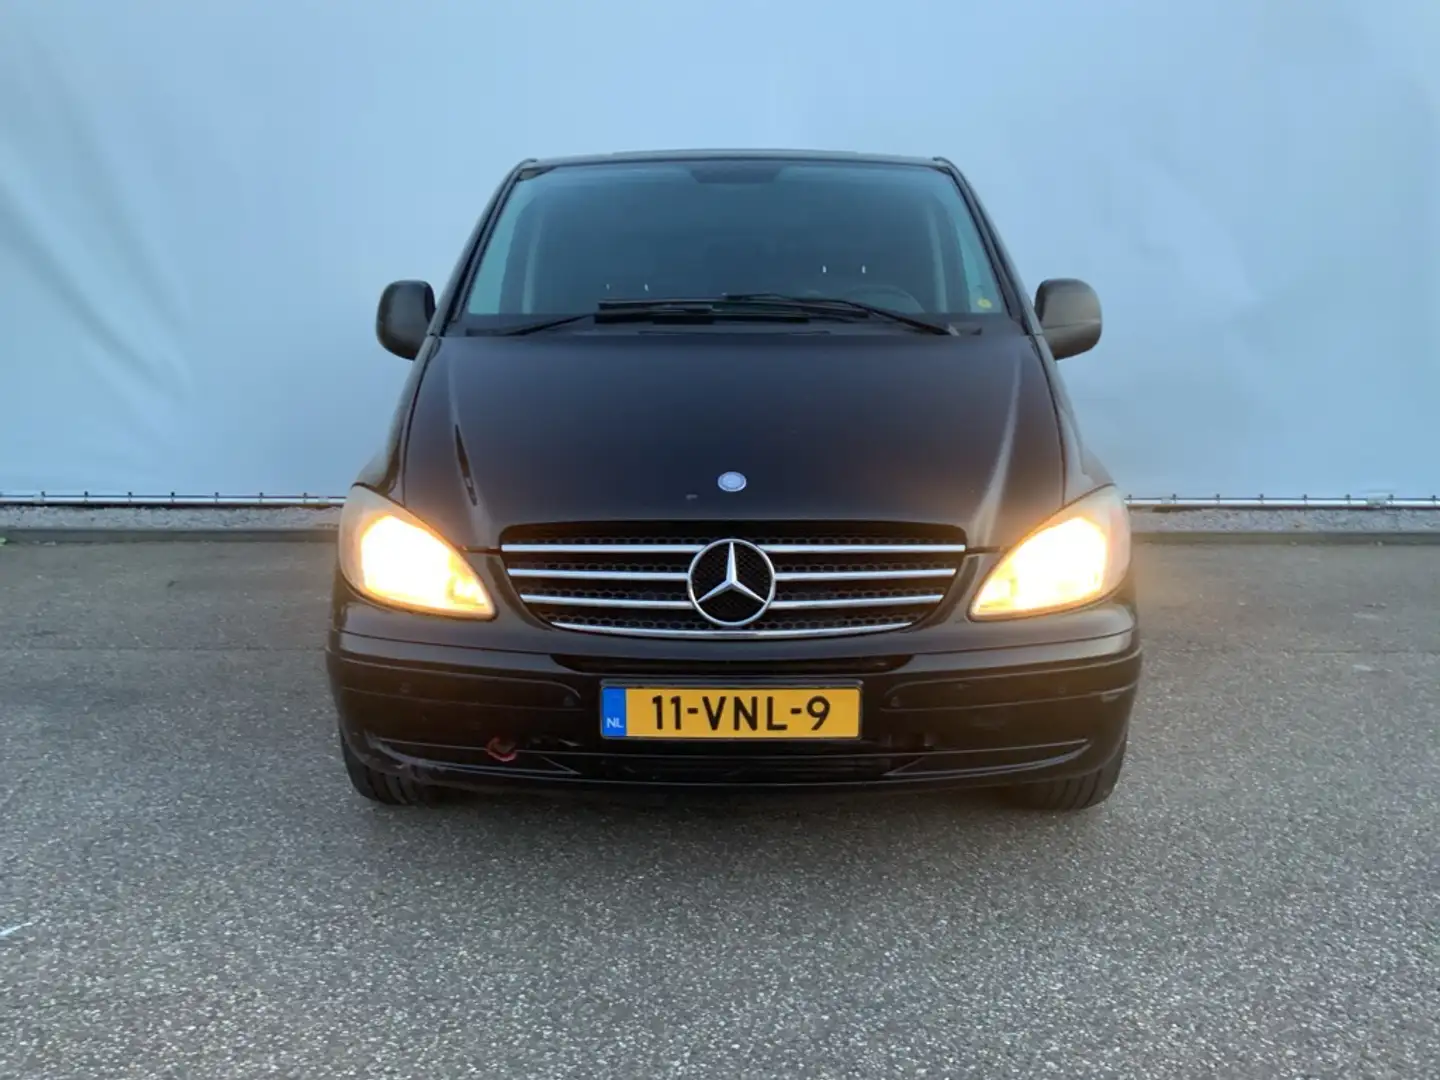 Mercedes-Benz Vito 120 CDI 343 DC luxe L3 Automaat Airco Cruise Leer Nero - 2